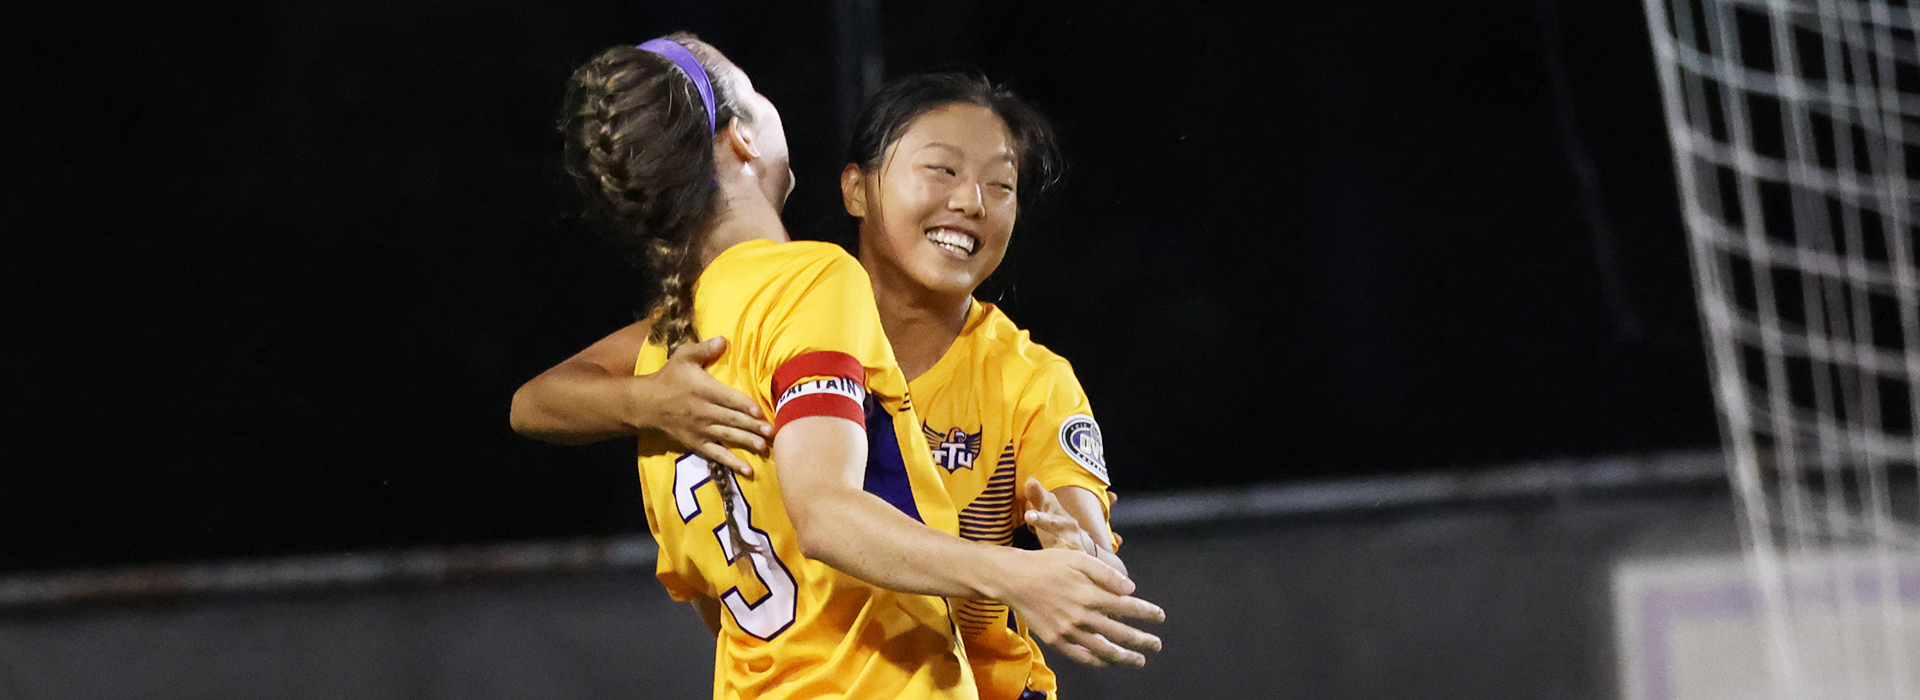 Golden Eagles soar to first win of season with 4-1 victory over Furman